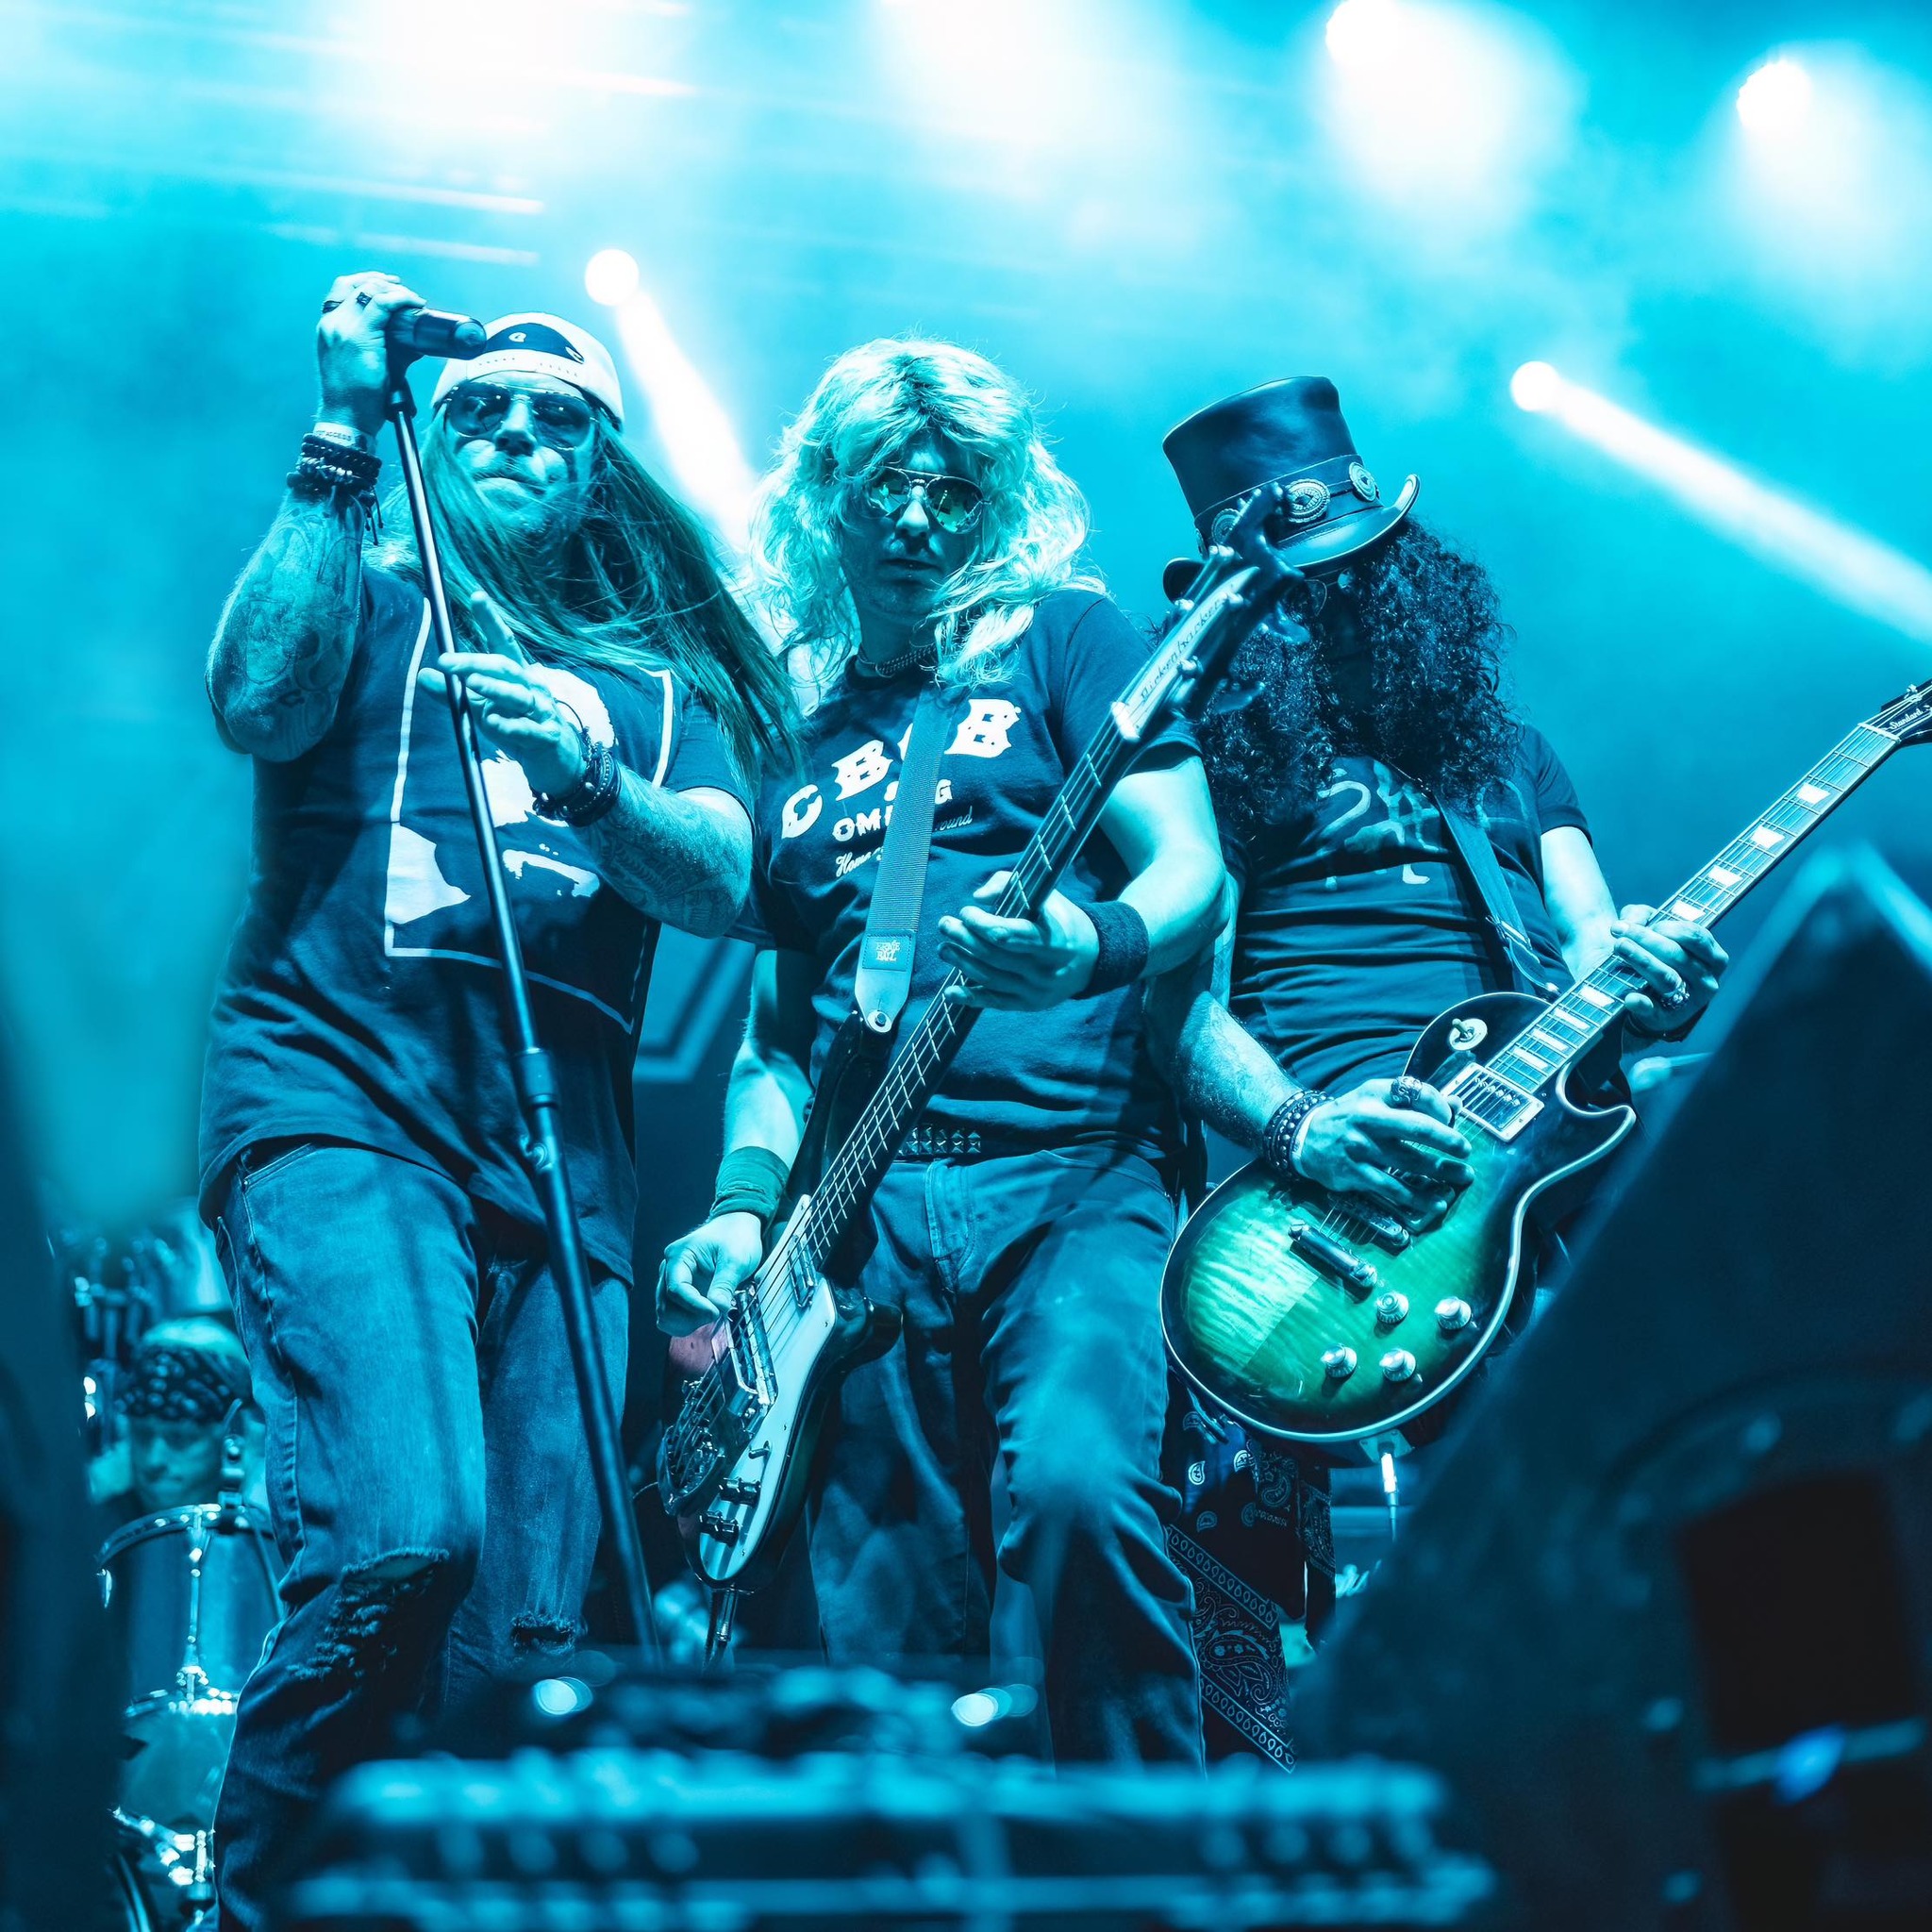 Welcome to Destruction - Guns N' Roses Tribute at Revolution Live